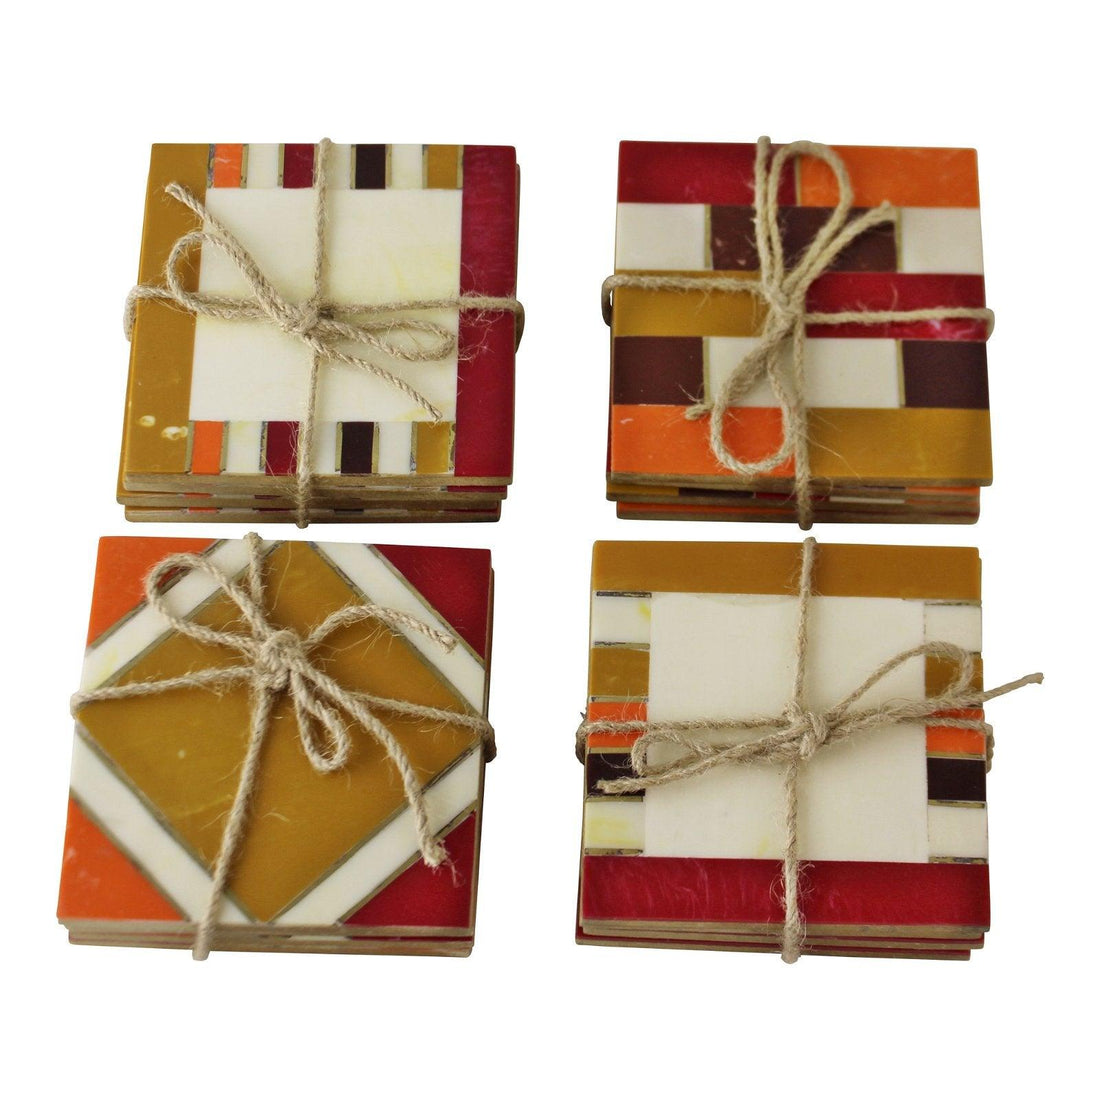 Set Of 4 Moroccan Inspired, Geometric Patterned Coasters - £22.99 - Coasters & Placemats 